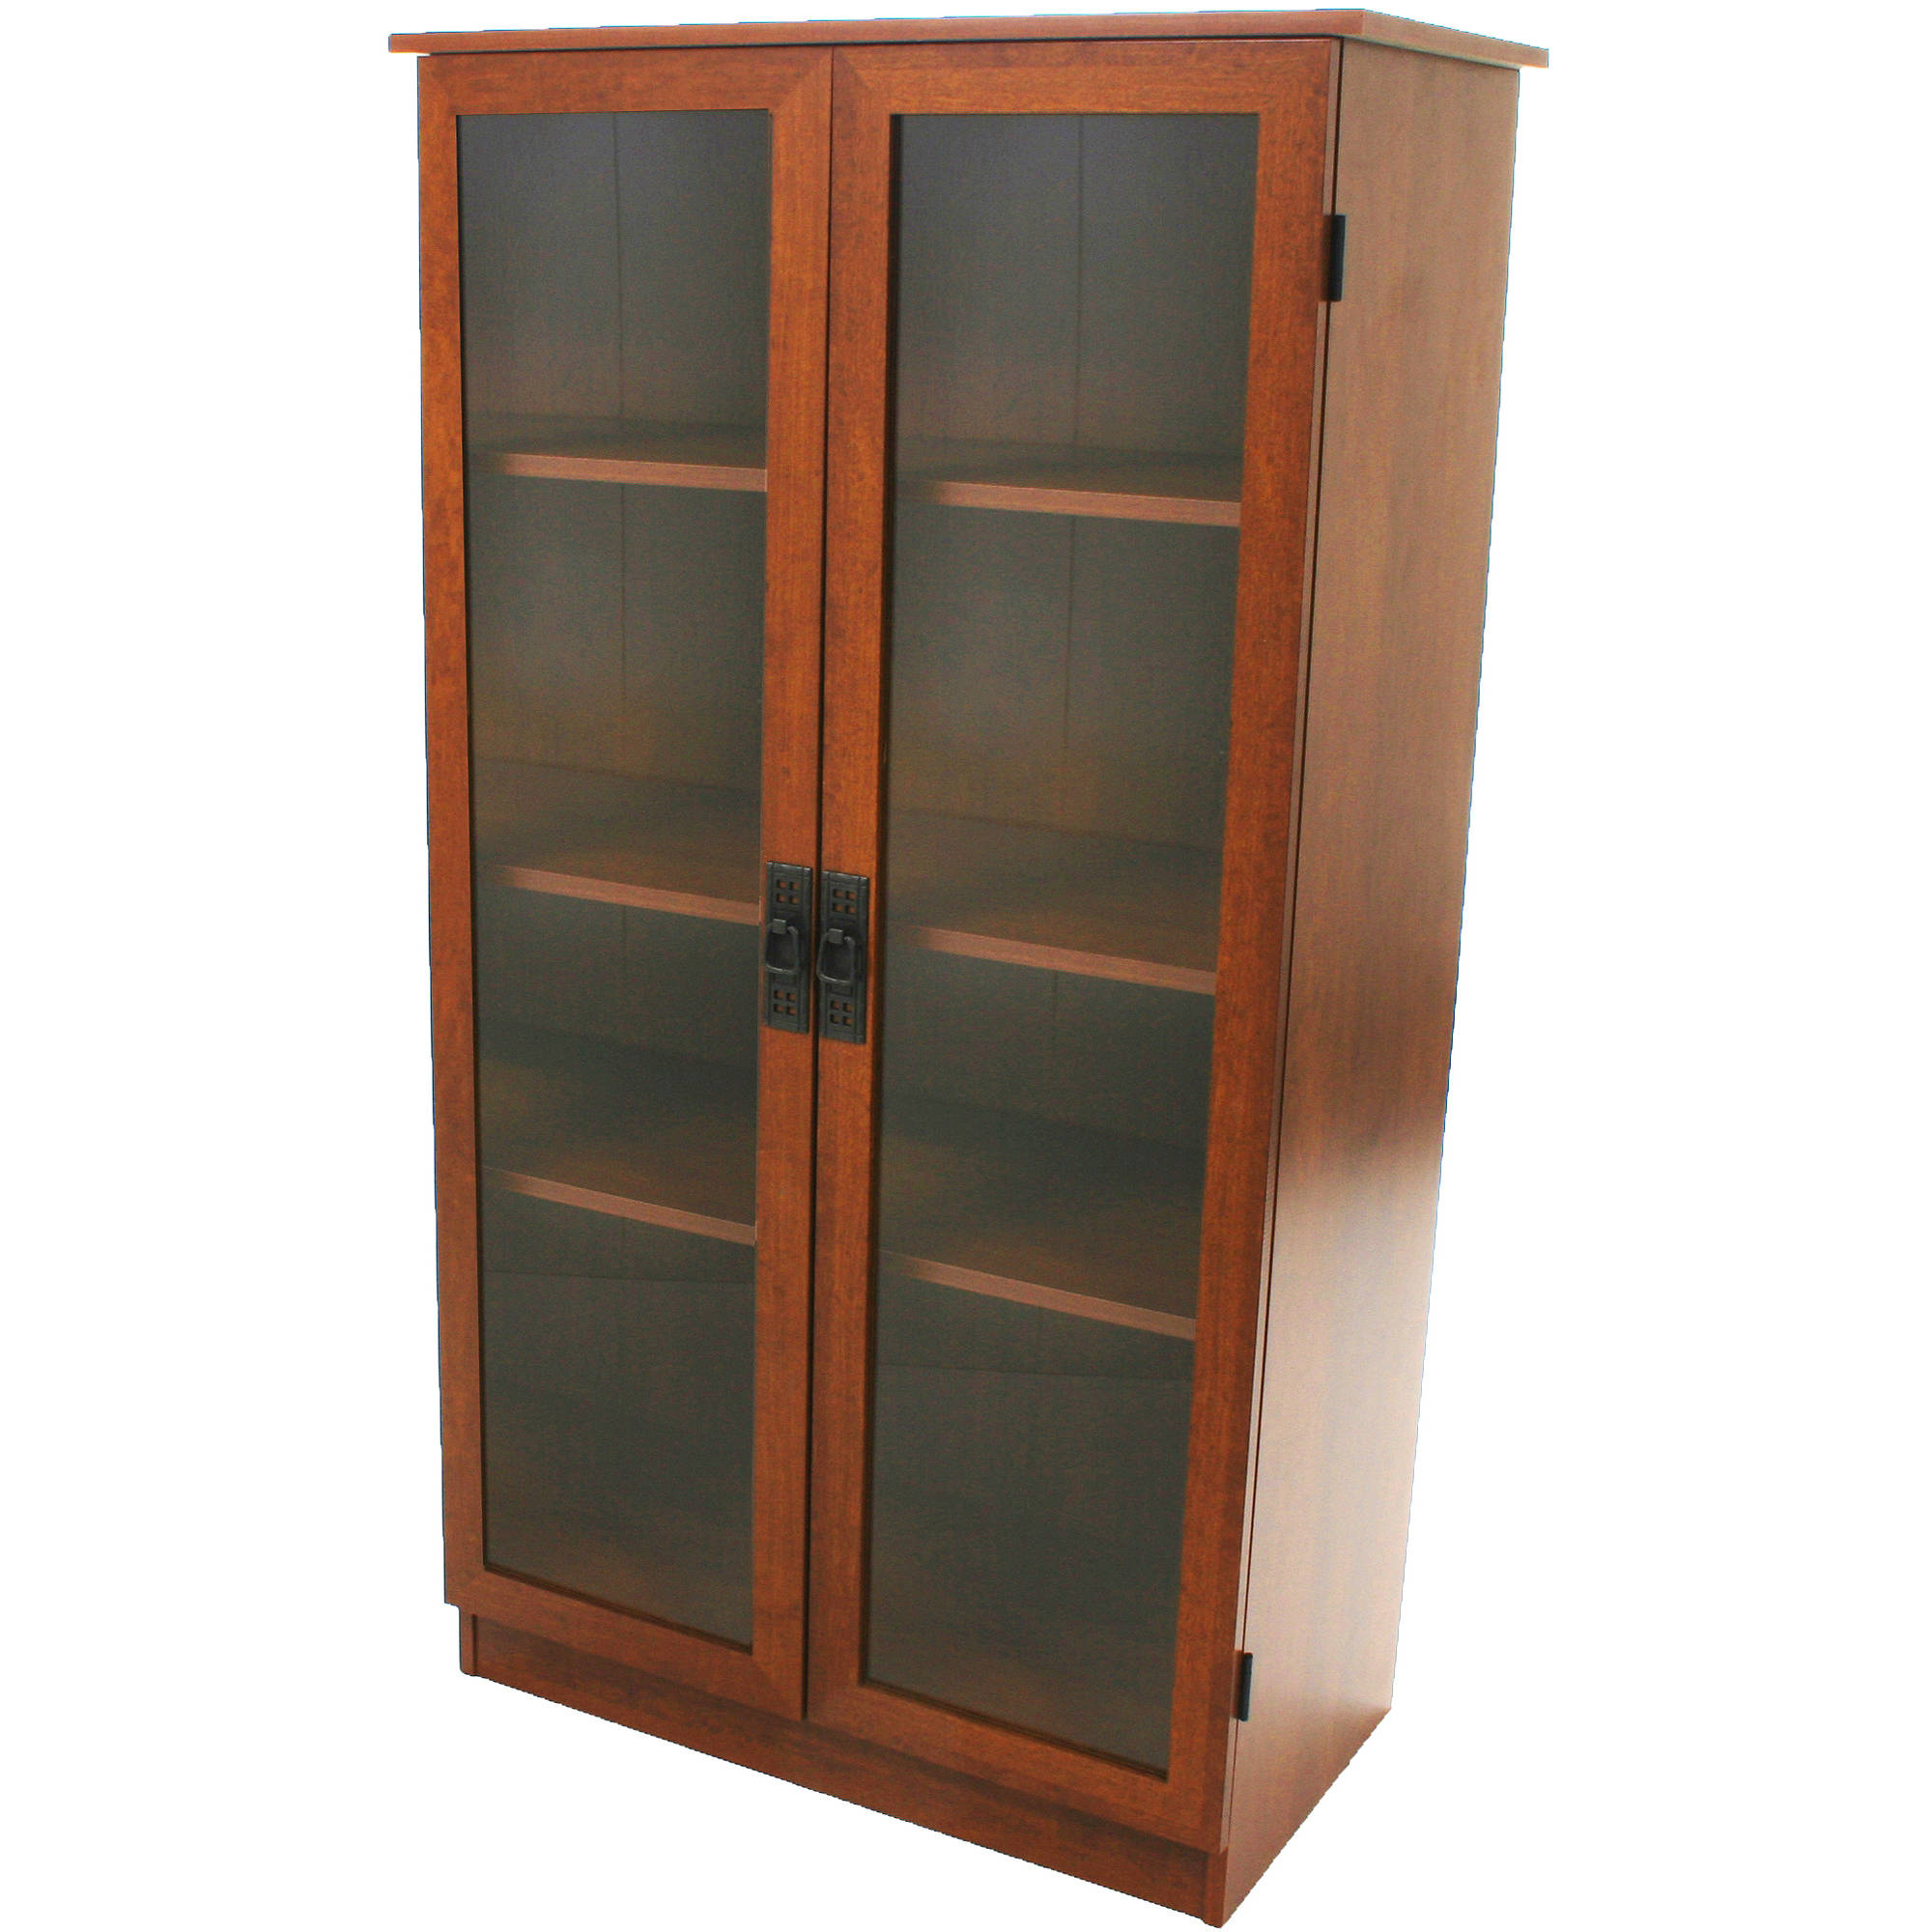 Ameriwood Industries Carina 53 H Four Shelf Bookcase With Glass Doors In Inspired Cherry